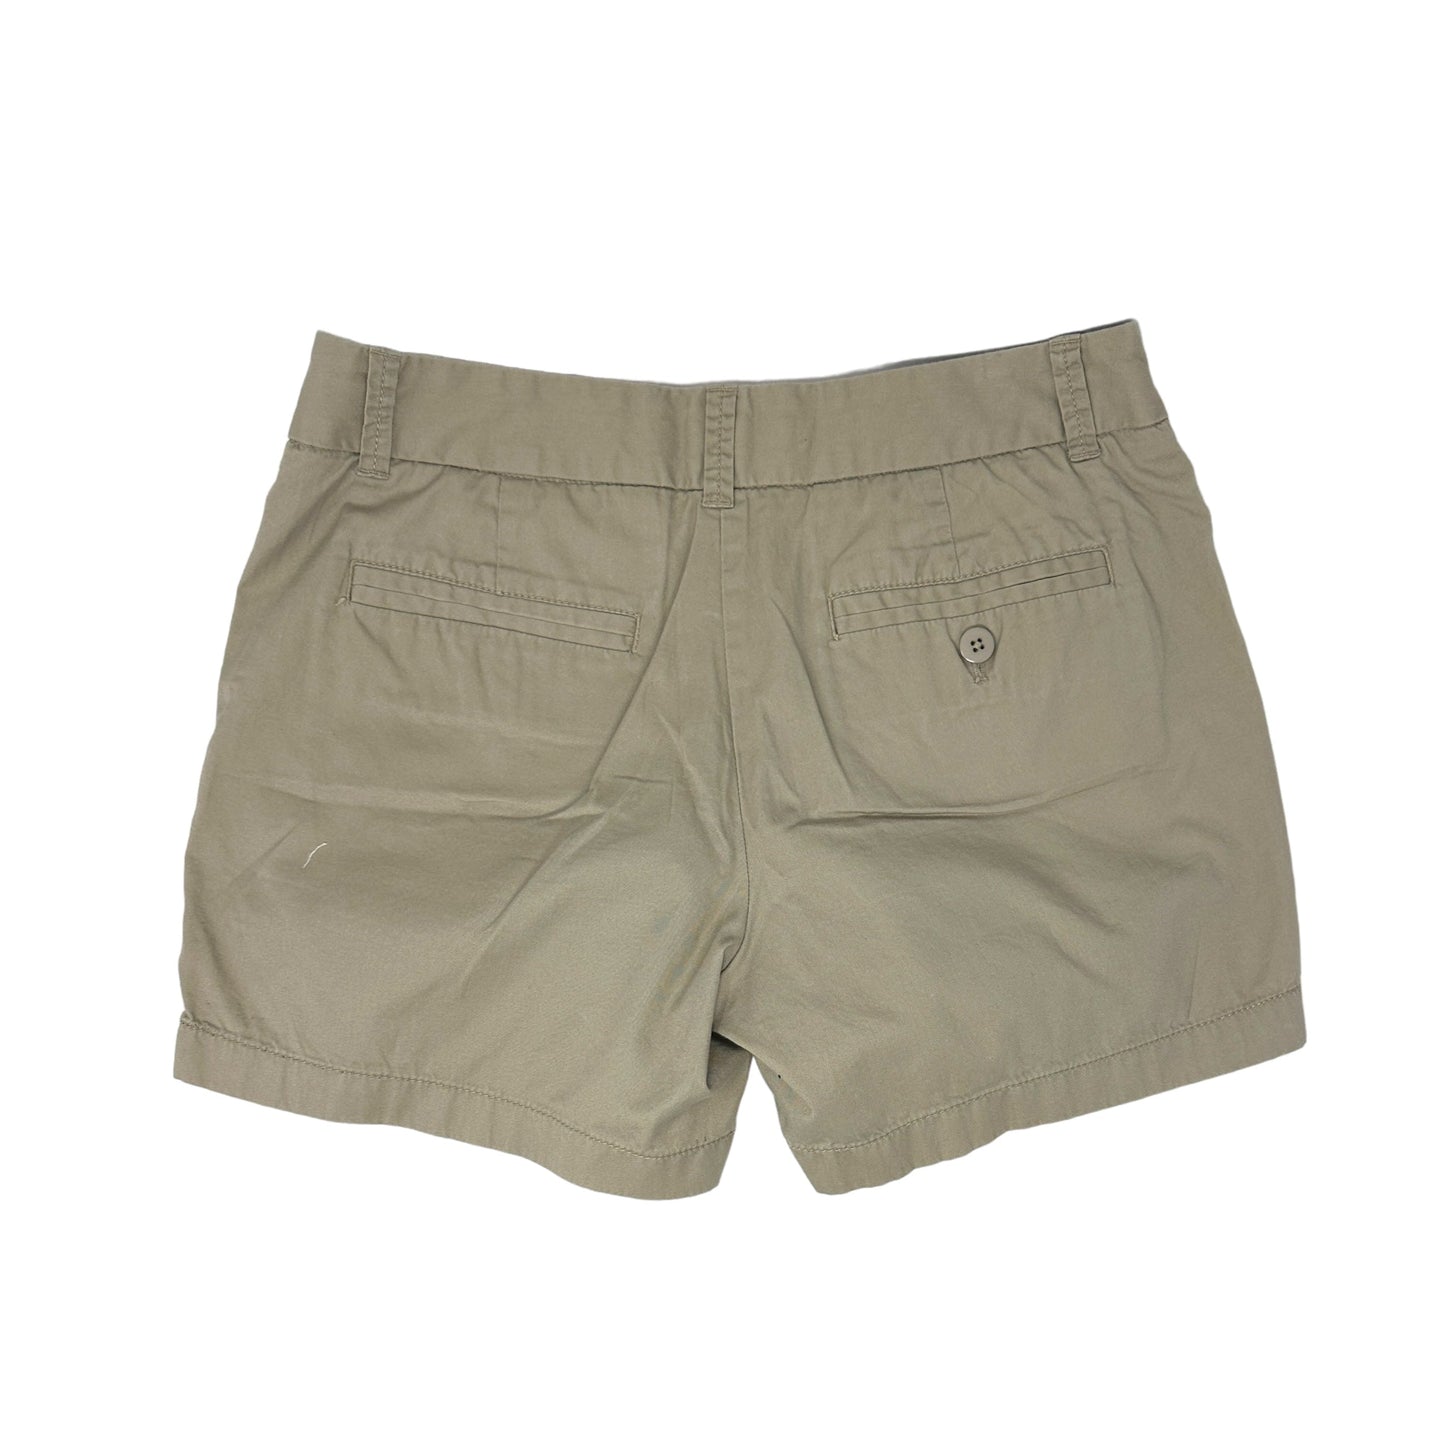 Shorts By J Crew  Size: 0